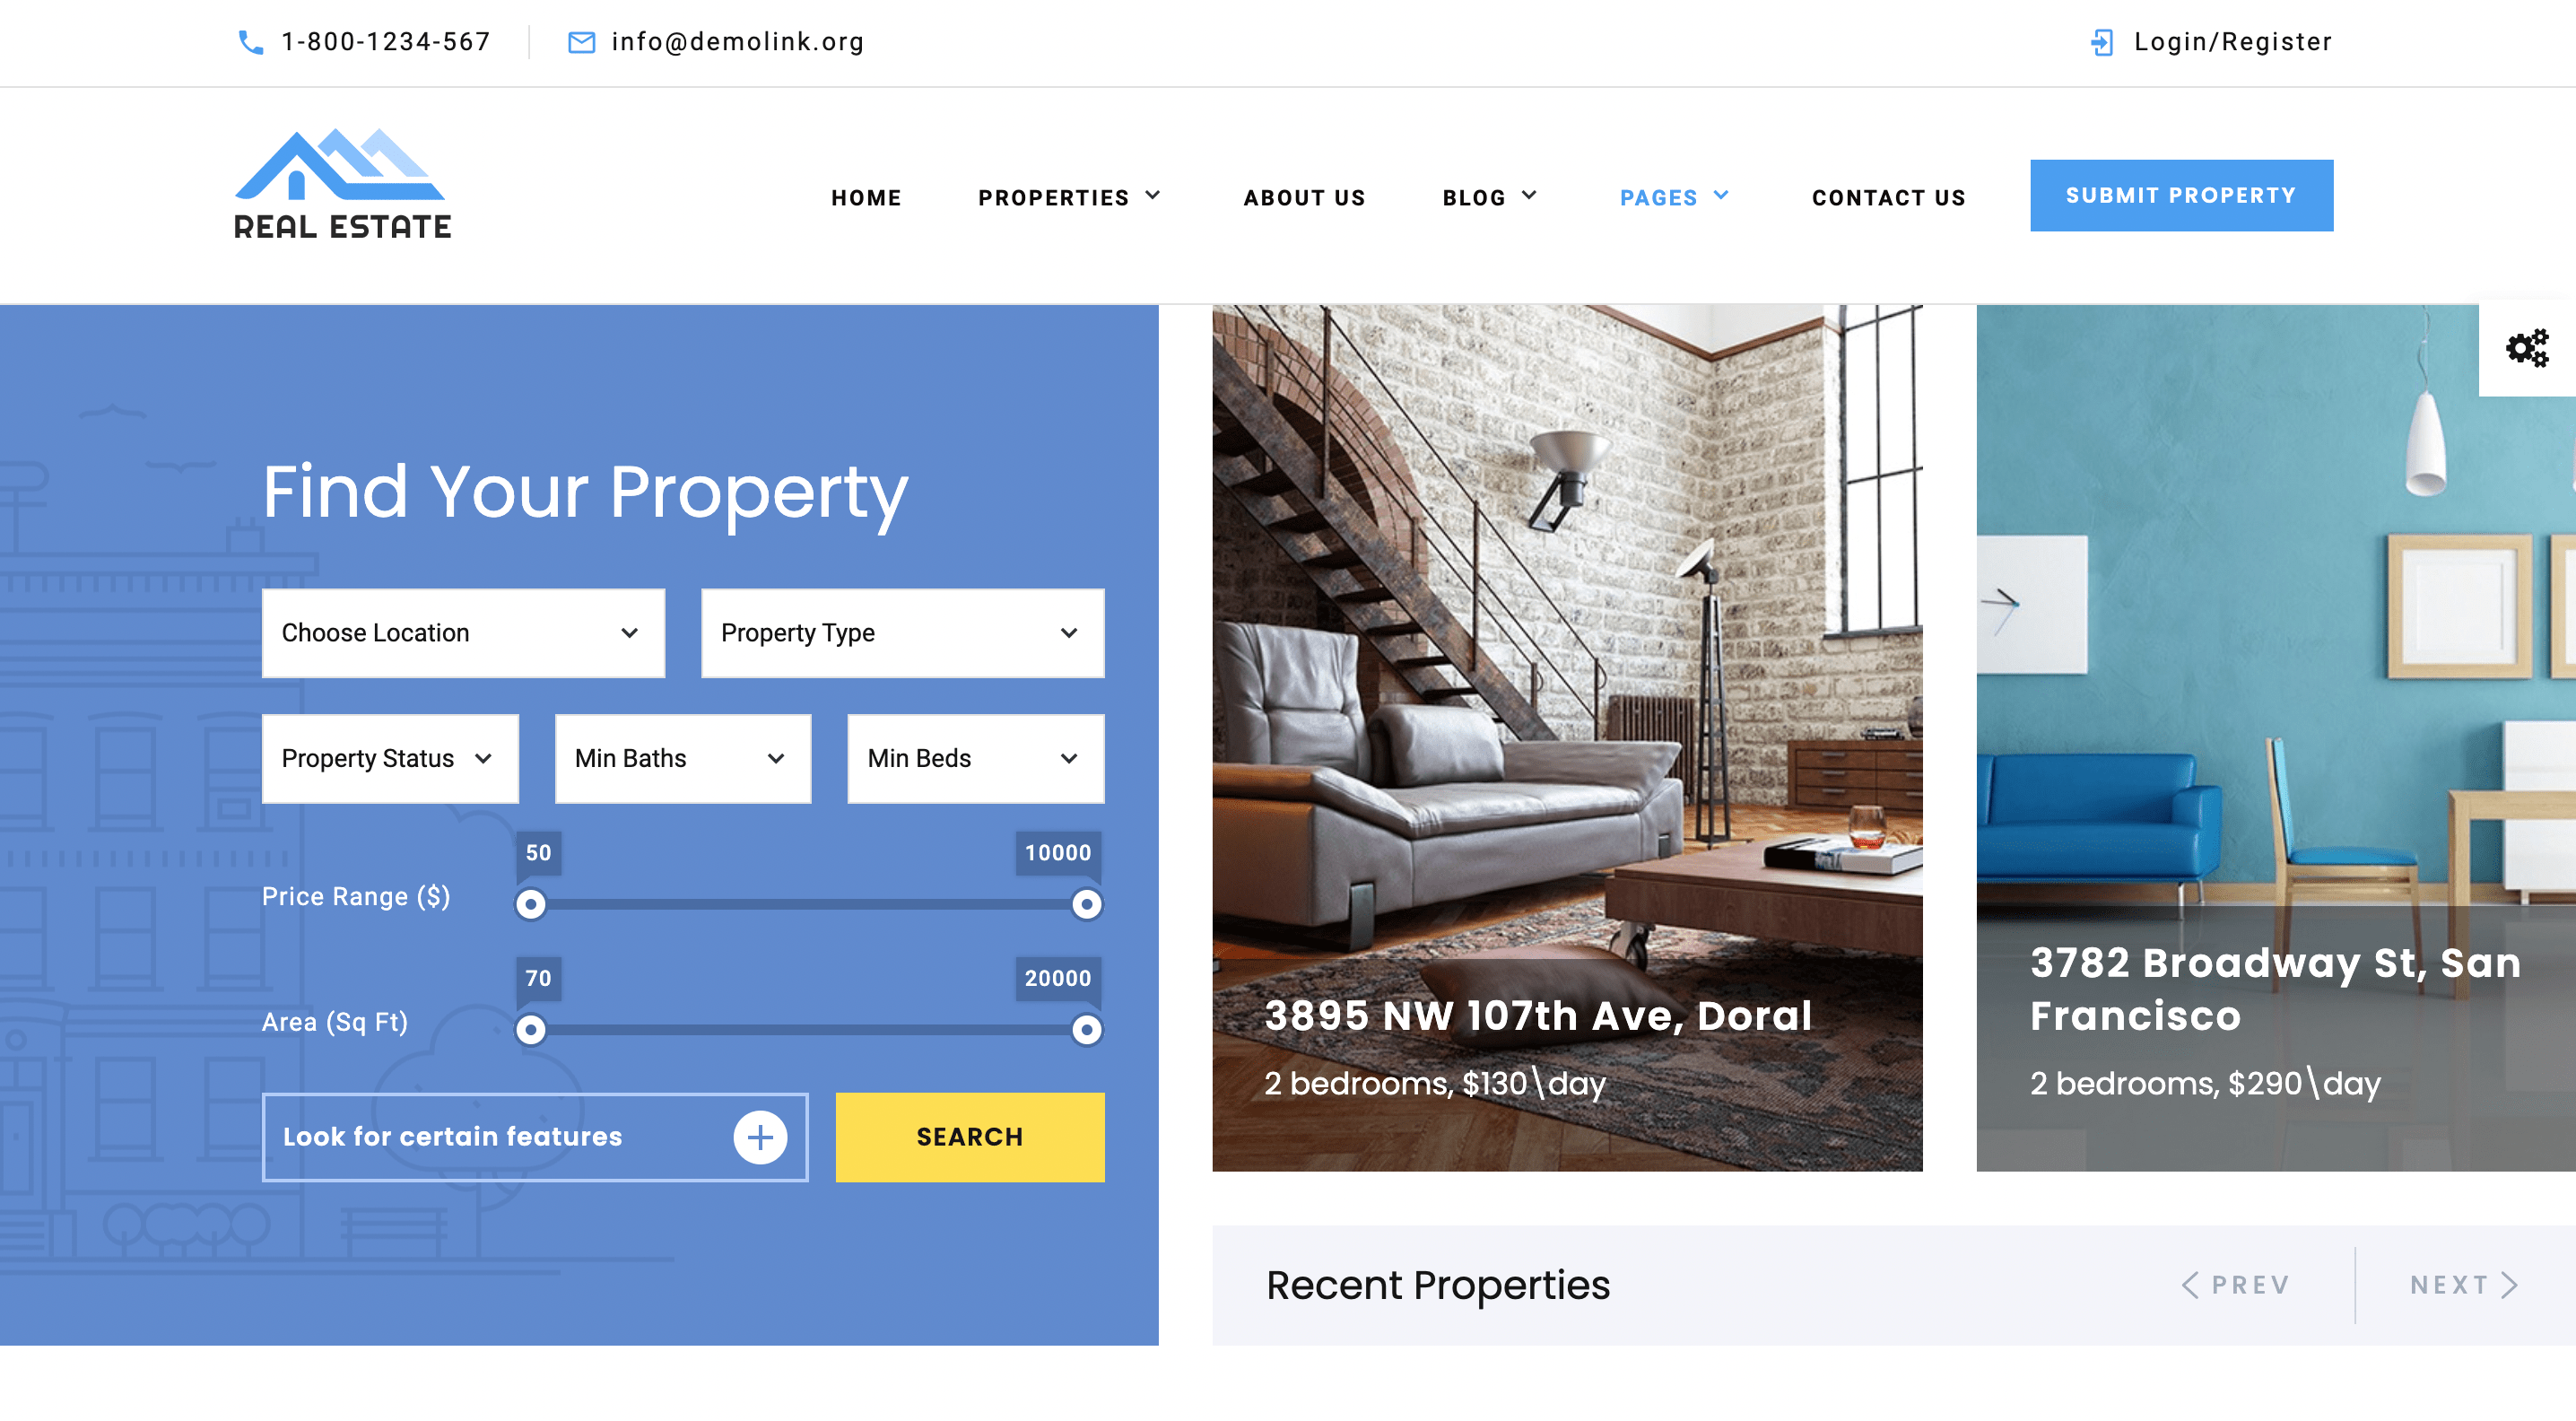 Residential real estate template for a property management site.